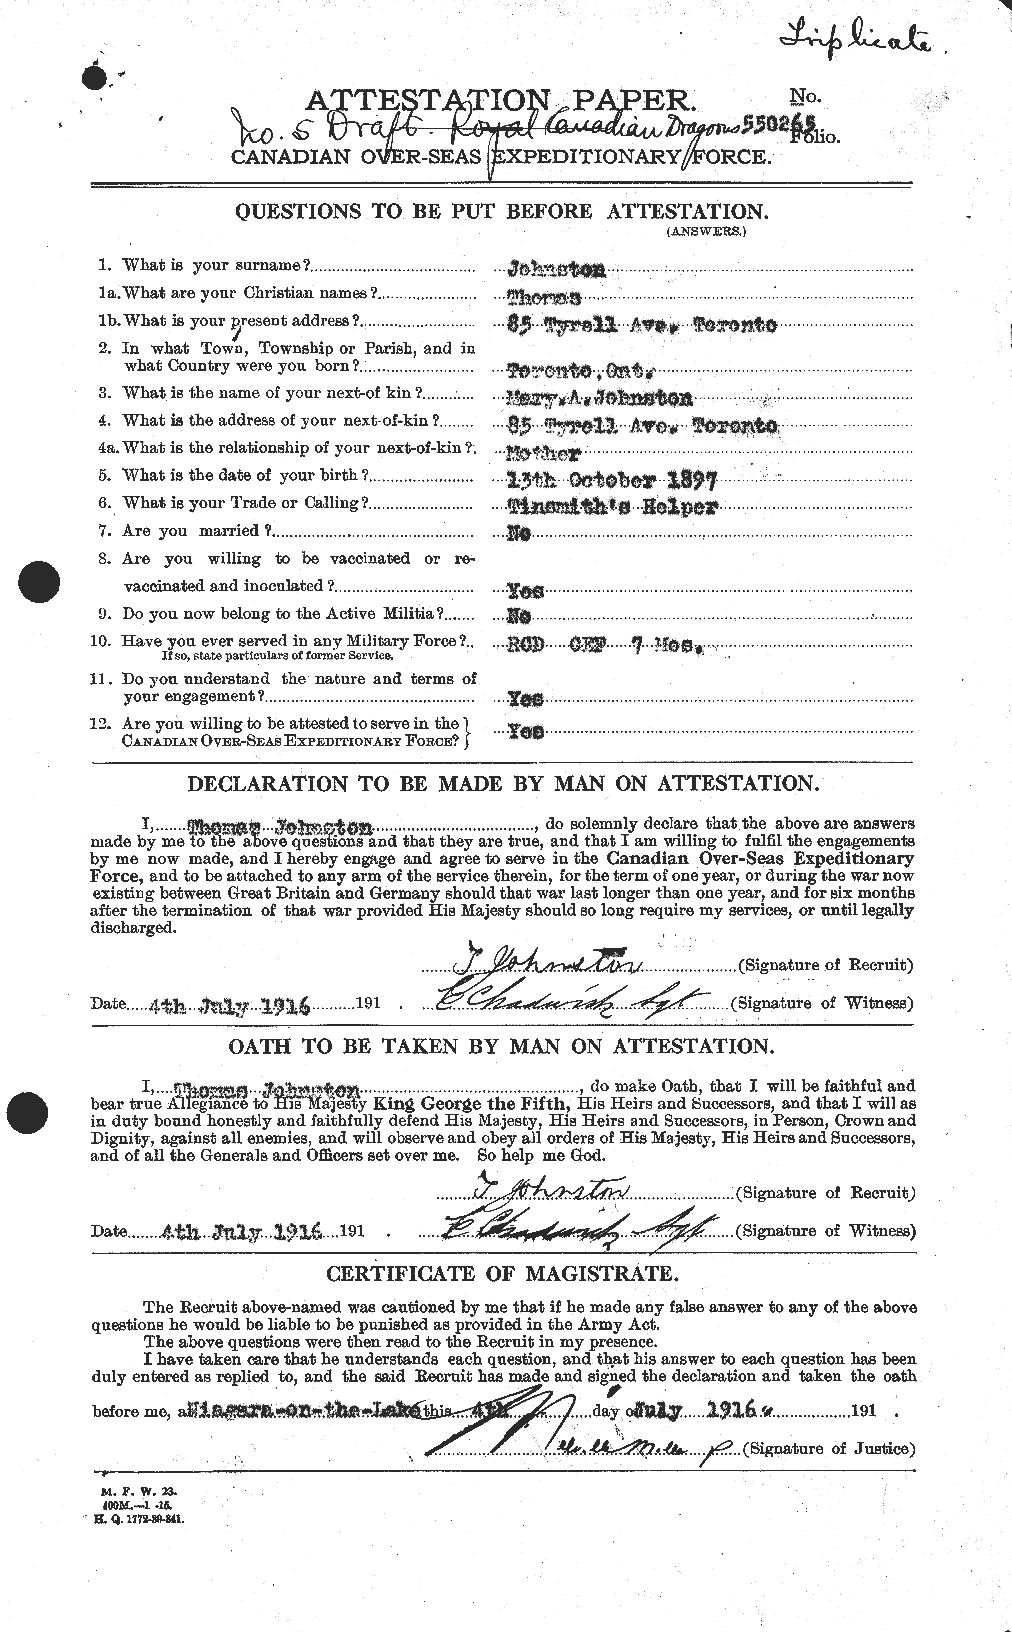 Personnel Records of the First World War - CEF 427123a